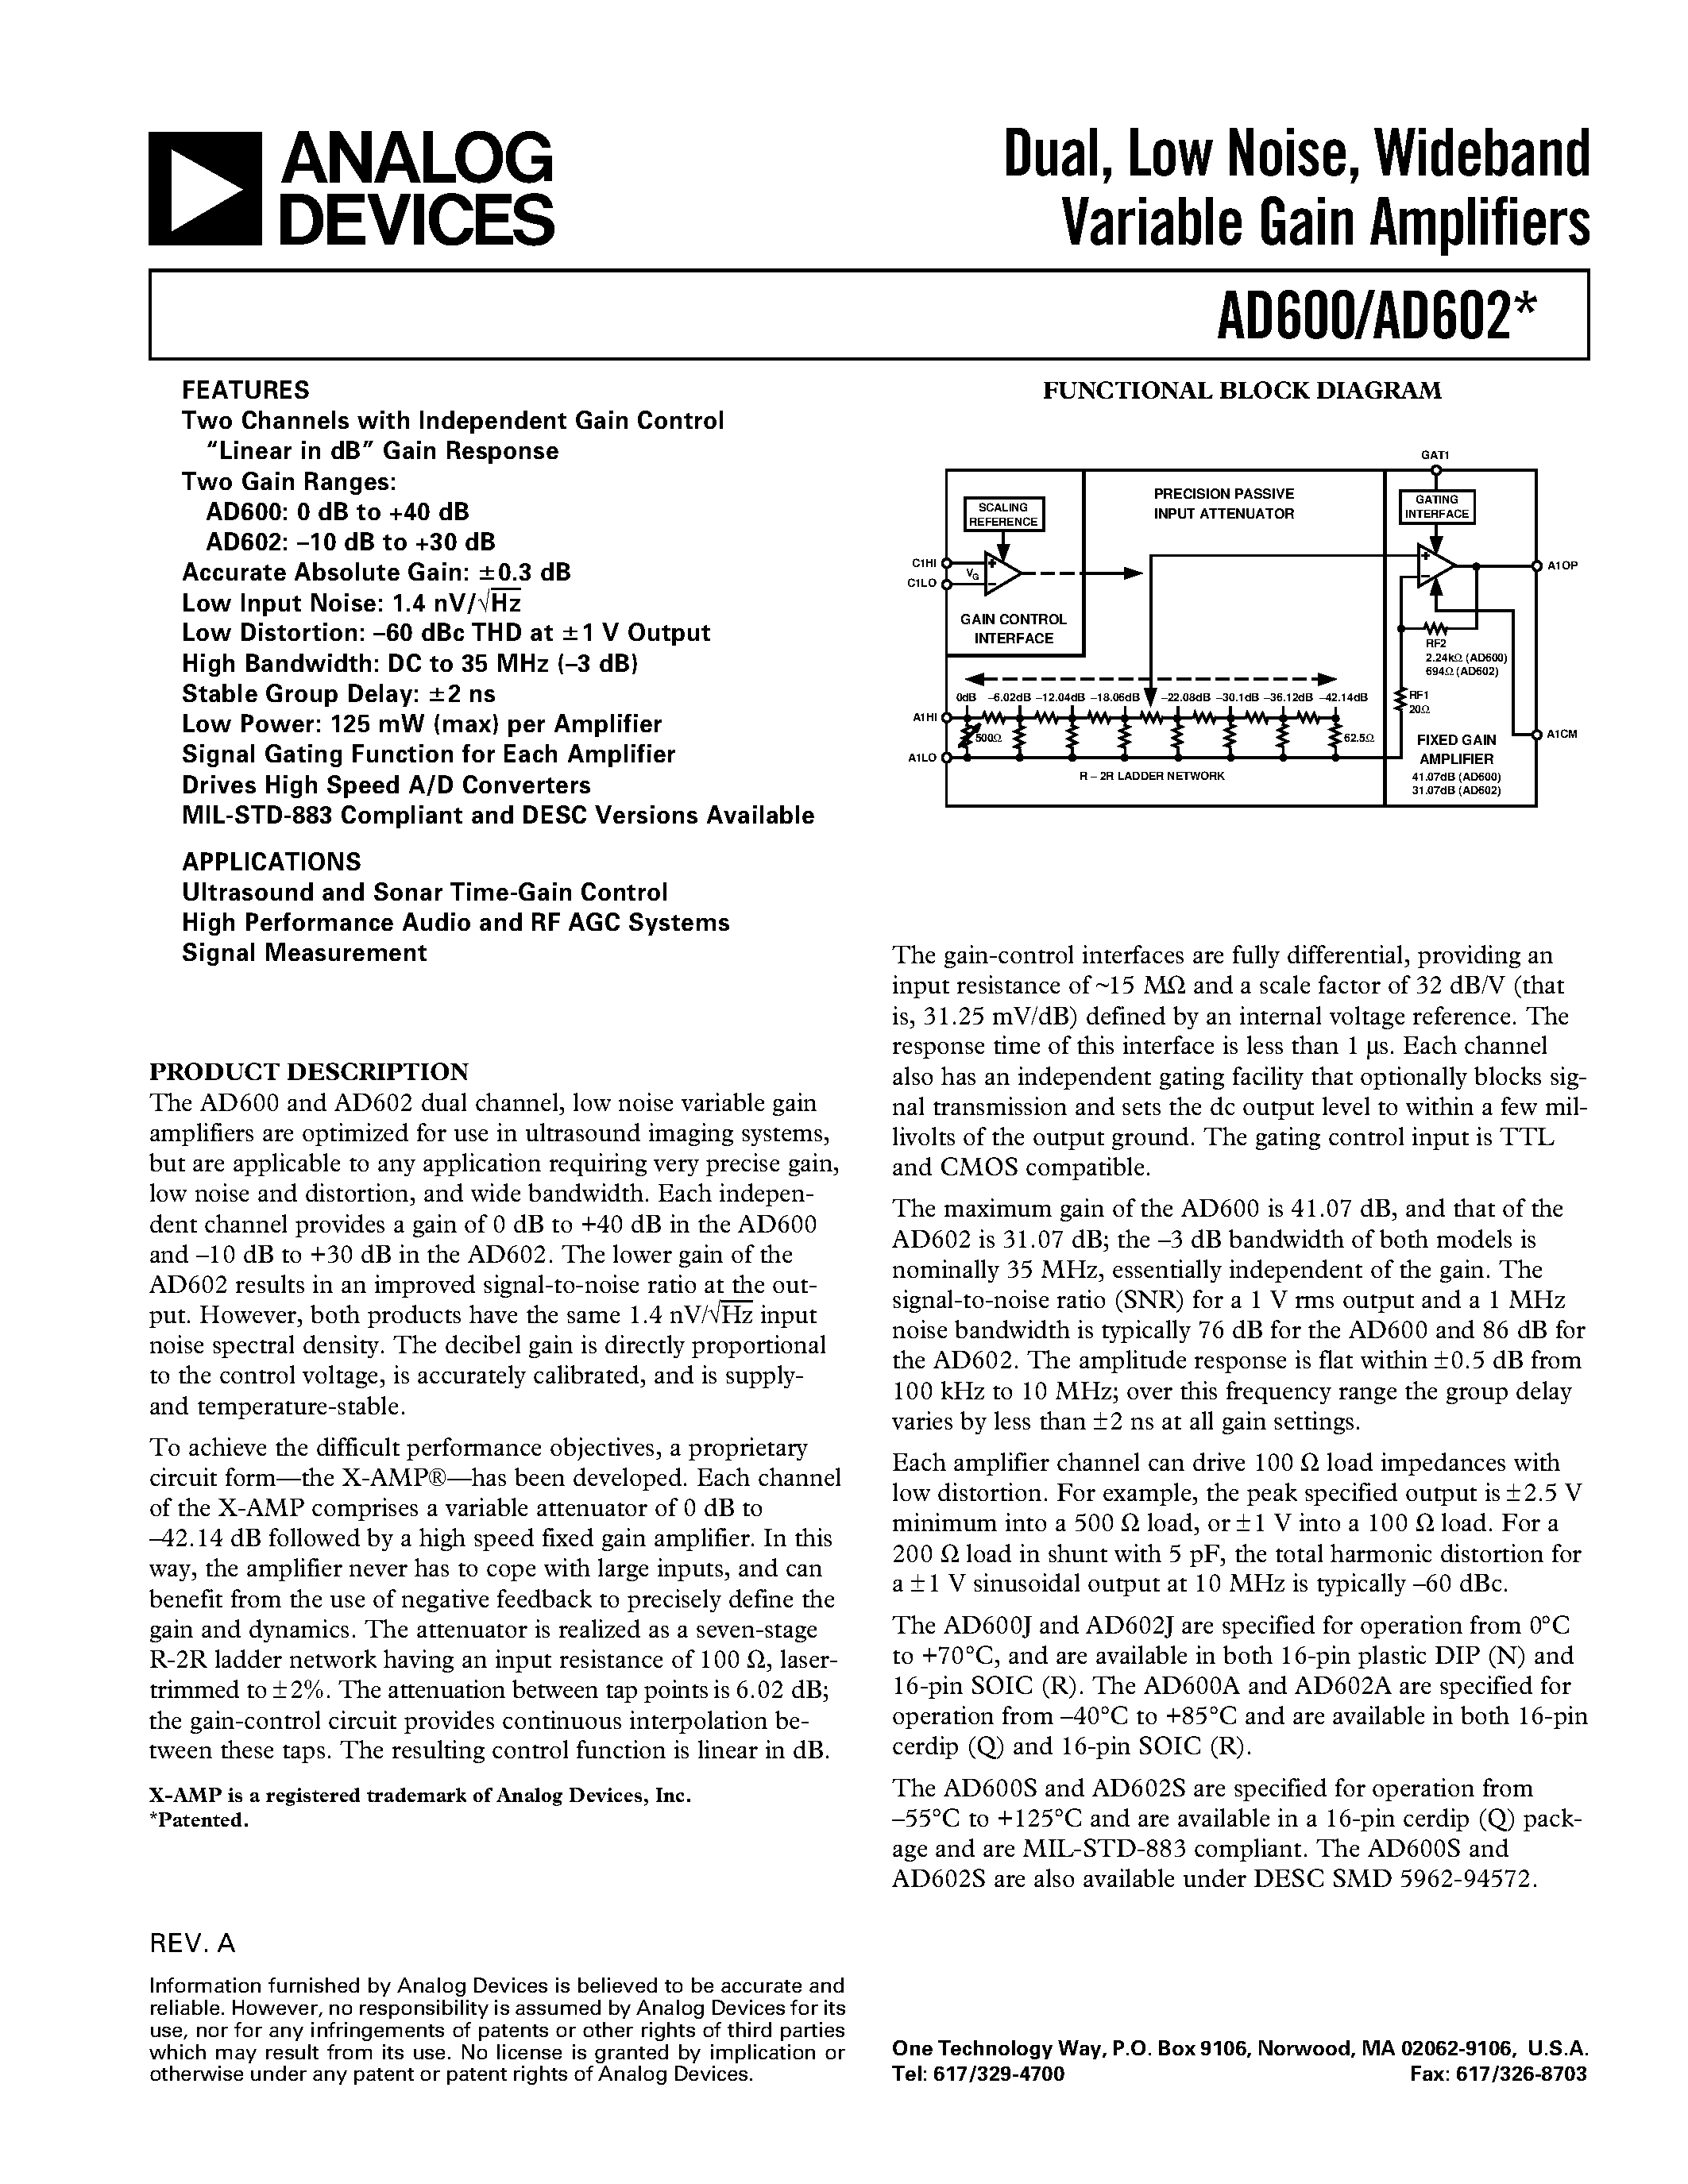 Datasheet AD602JR - Dual/ Low Noise/ Wideband Variable Gain Amplifiers page 1